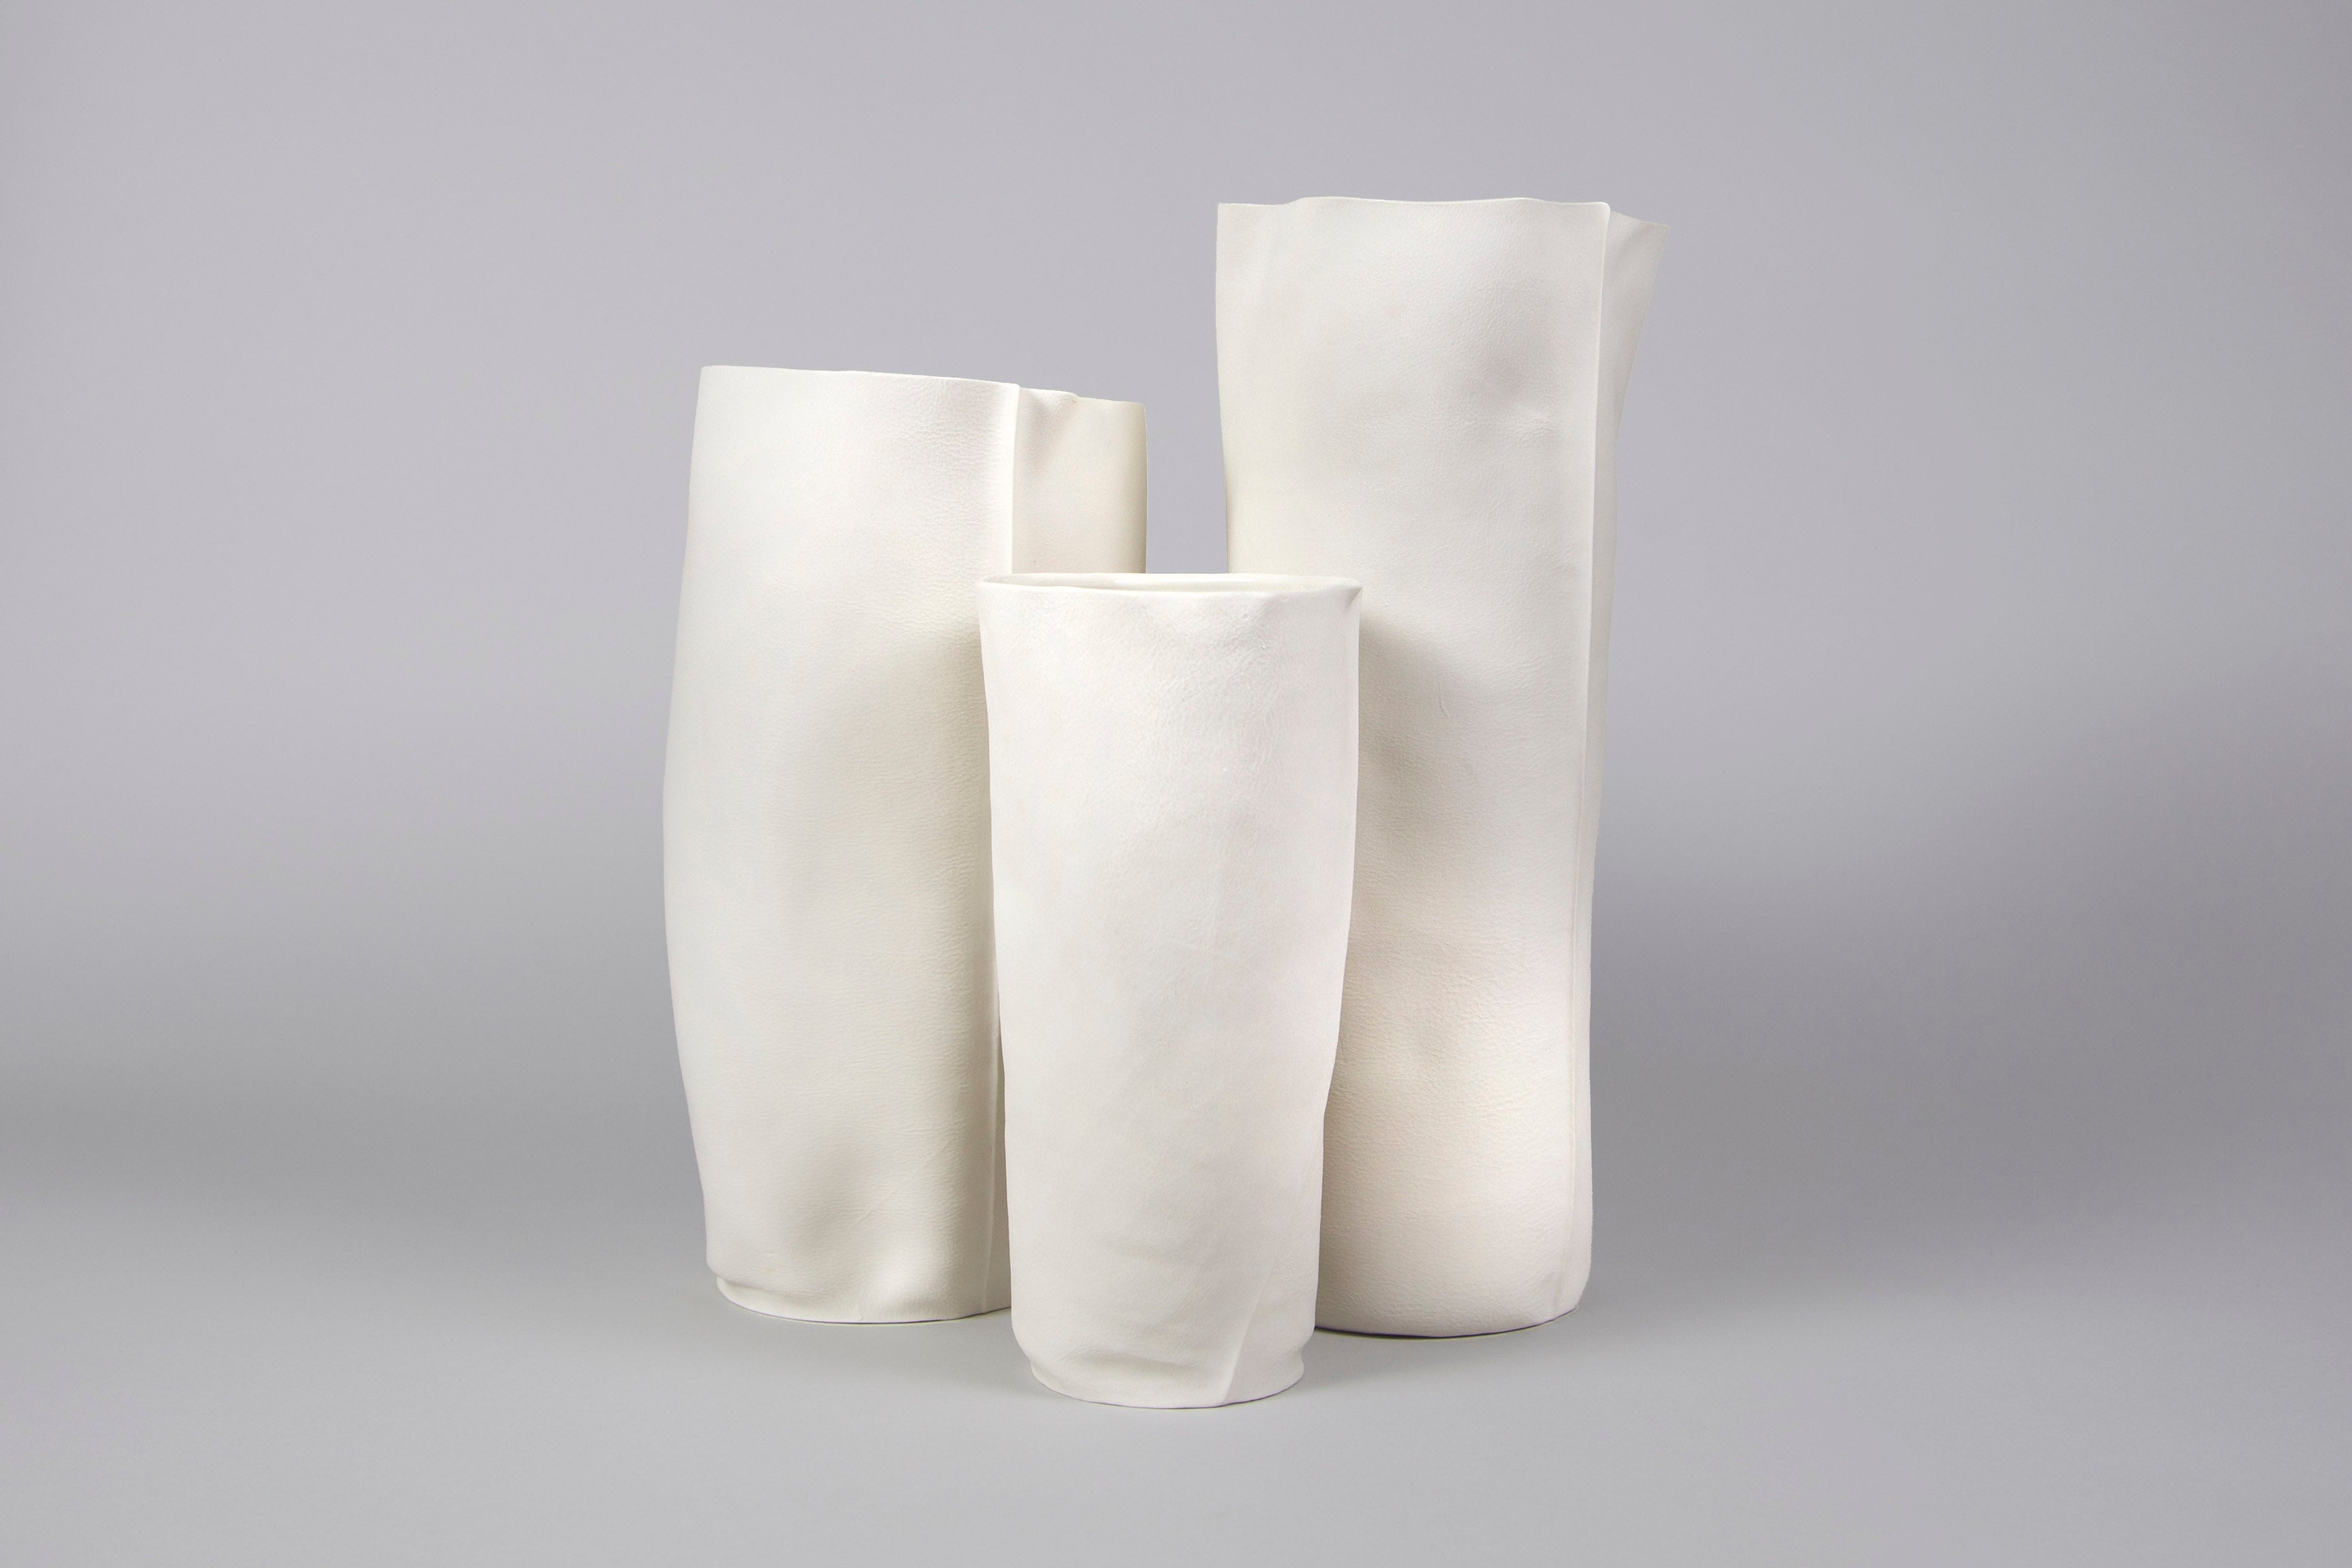 Contemporary Set of 3 White Ceramic Kawa Vessels, Leather textured organic Porcelain vases For Sale